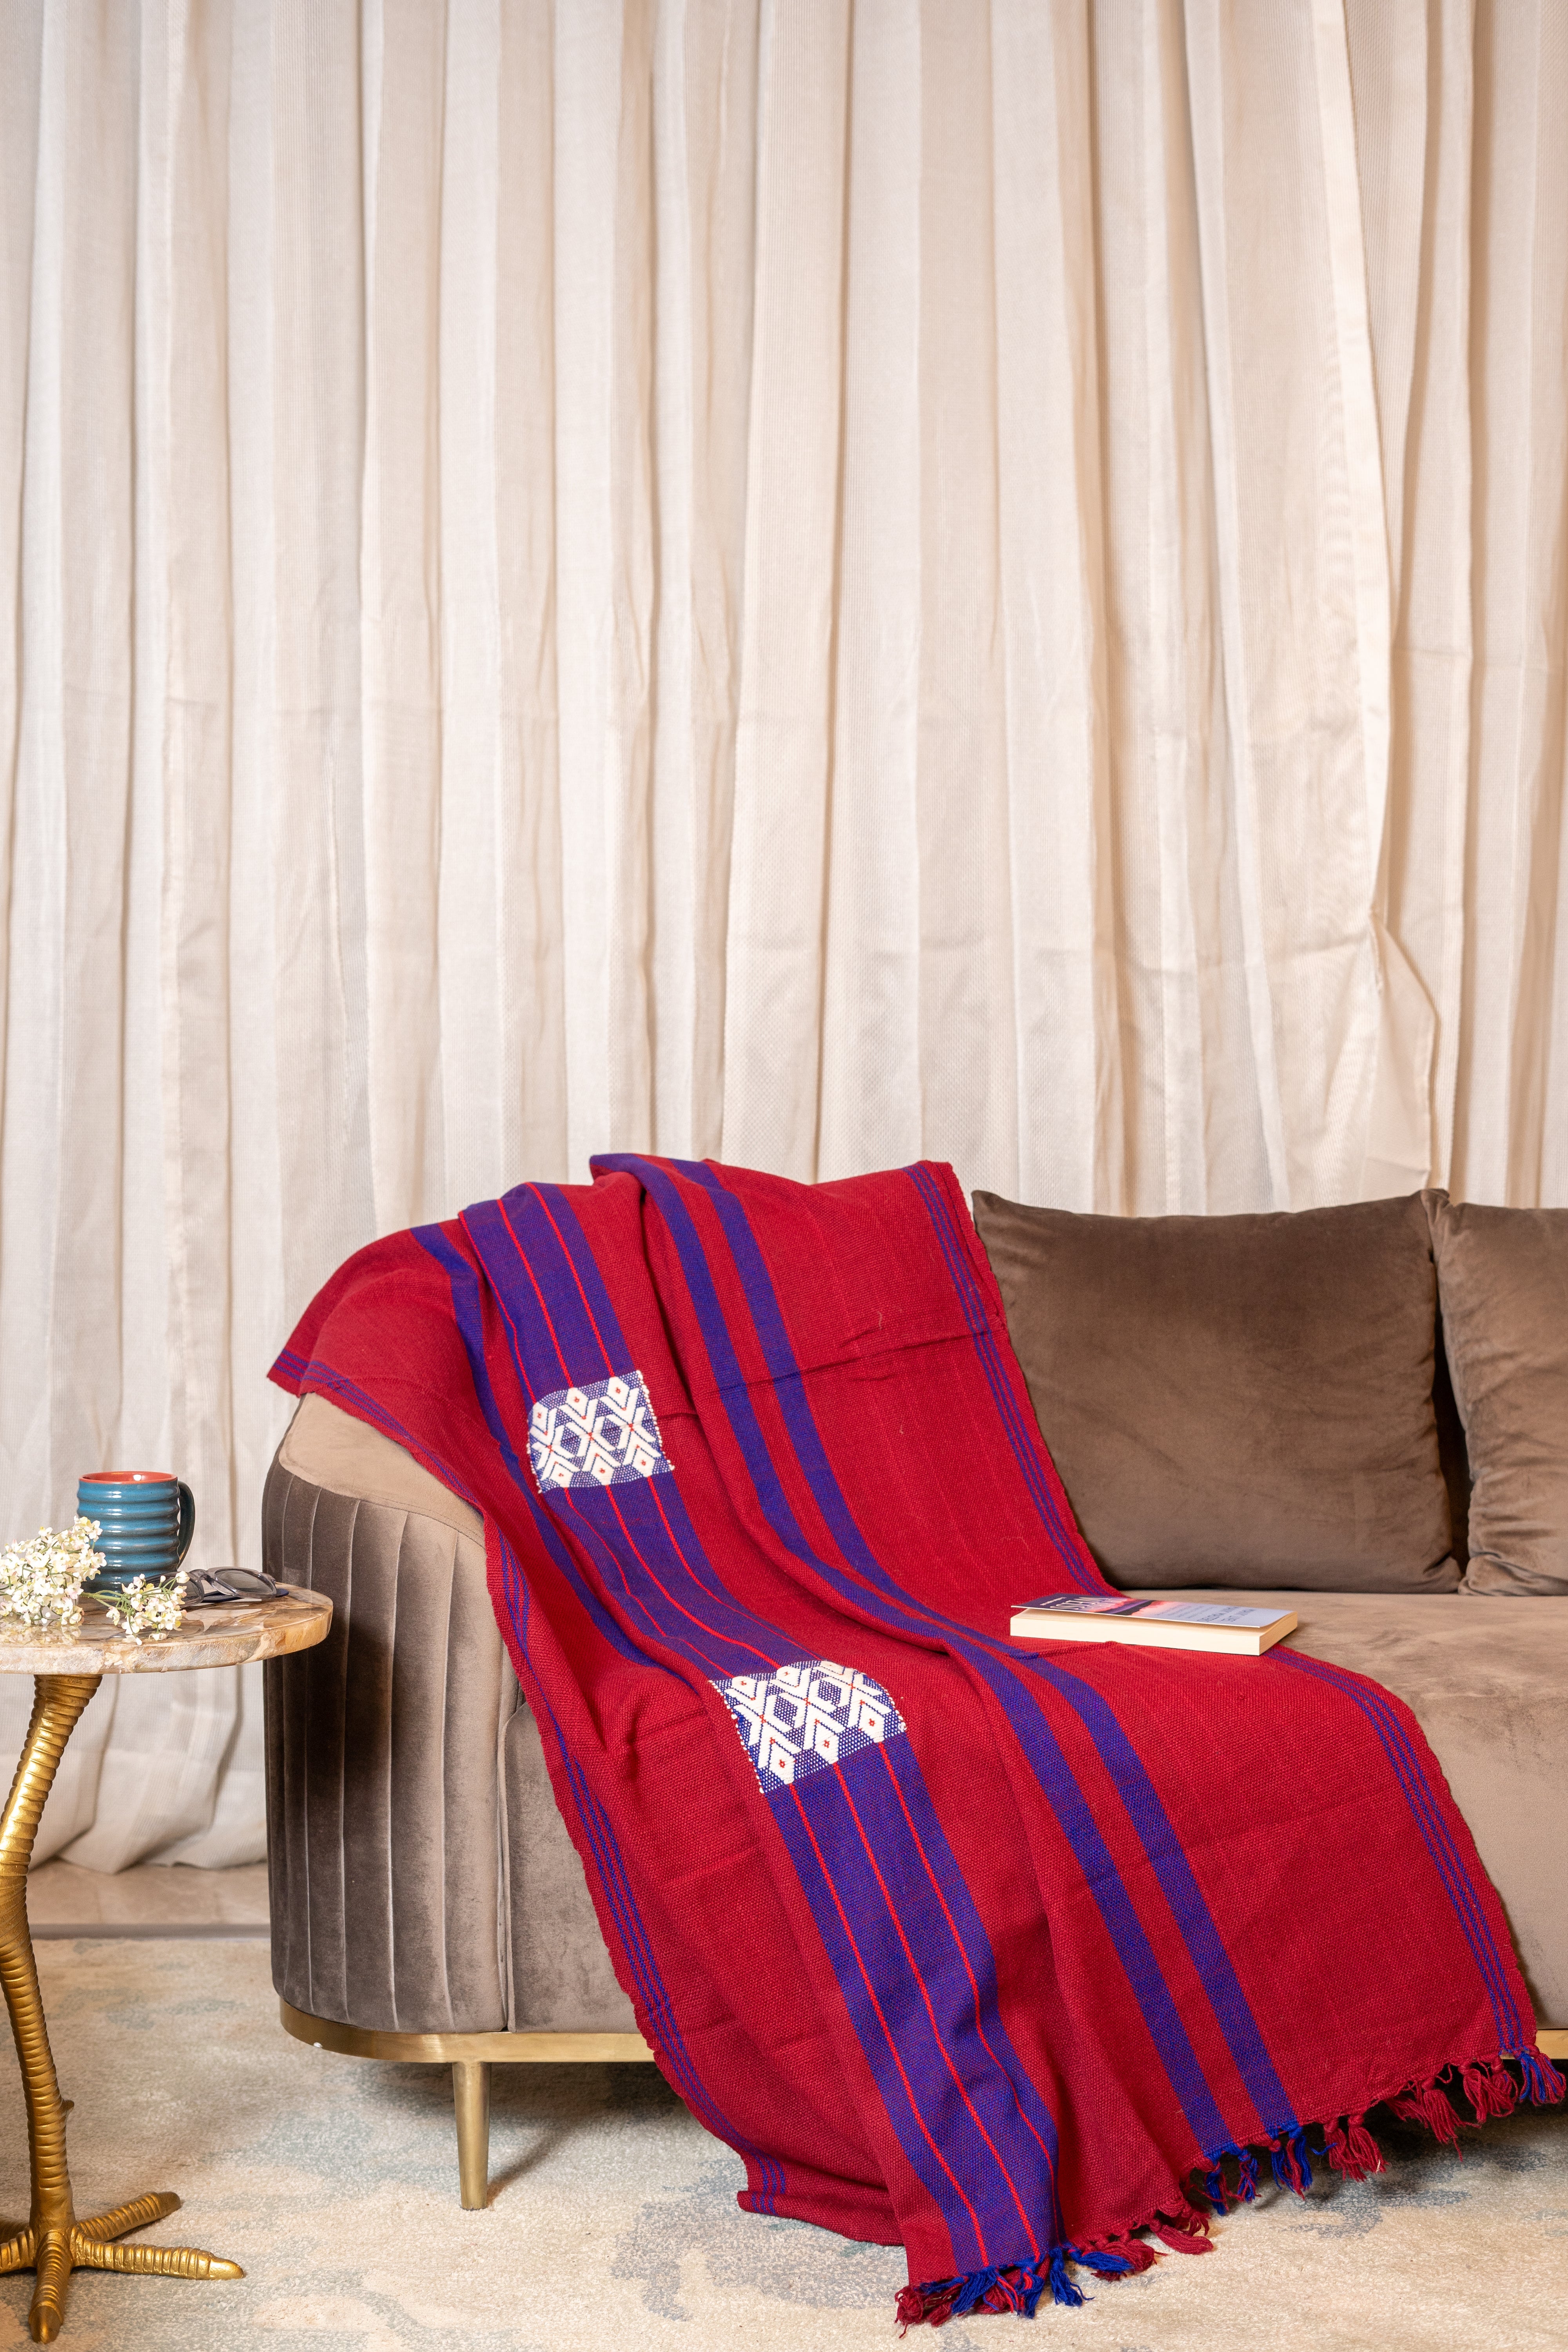 OMVAI Artisanal Patterned Cashmilon Woven Throw Blanket / Comforter Burgandy with Blue, and White weave border